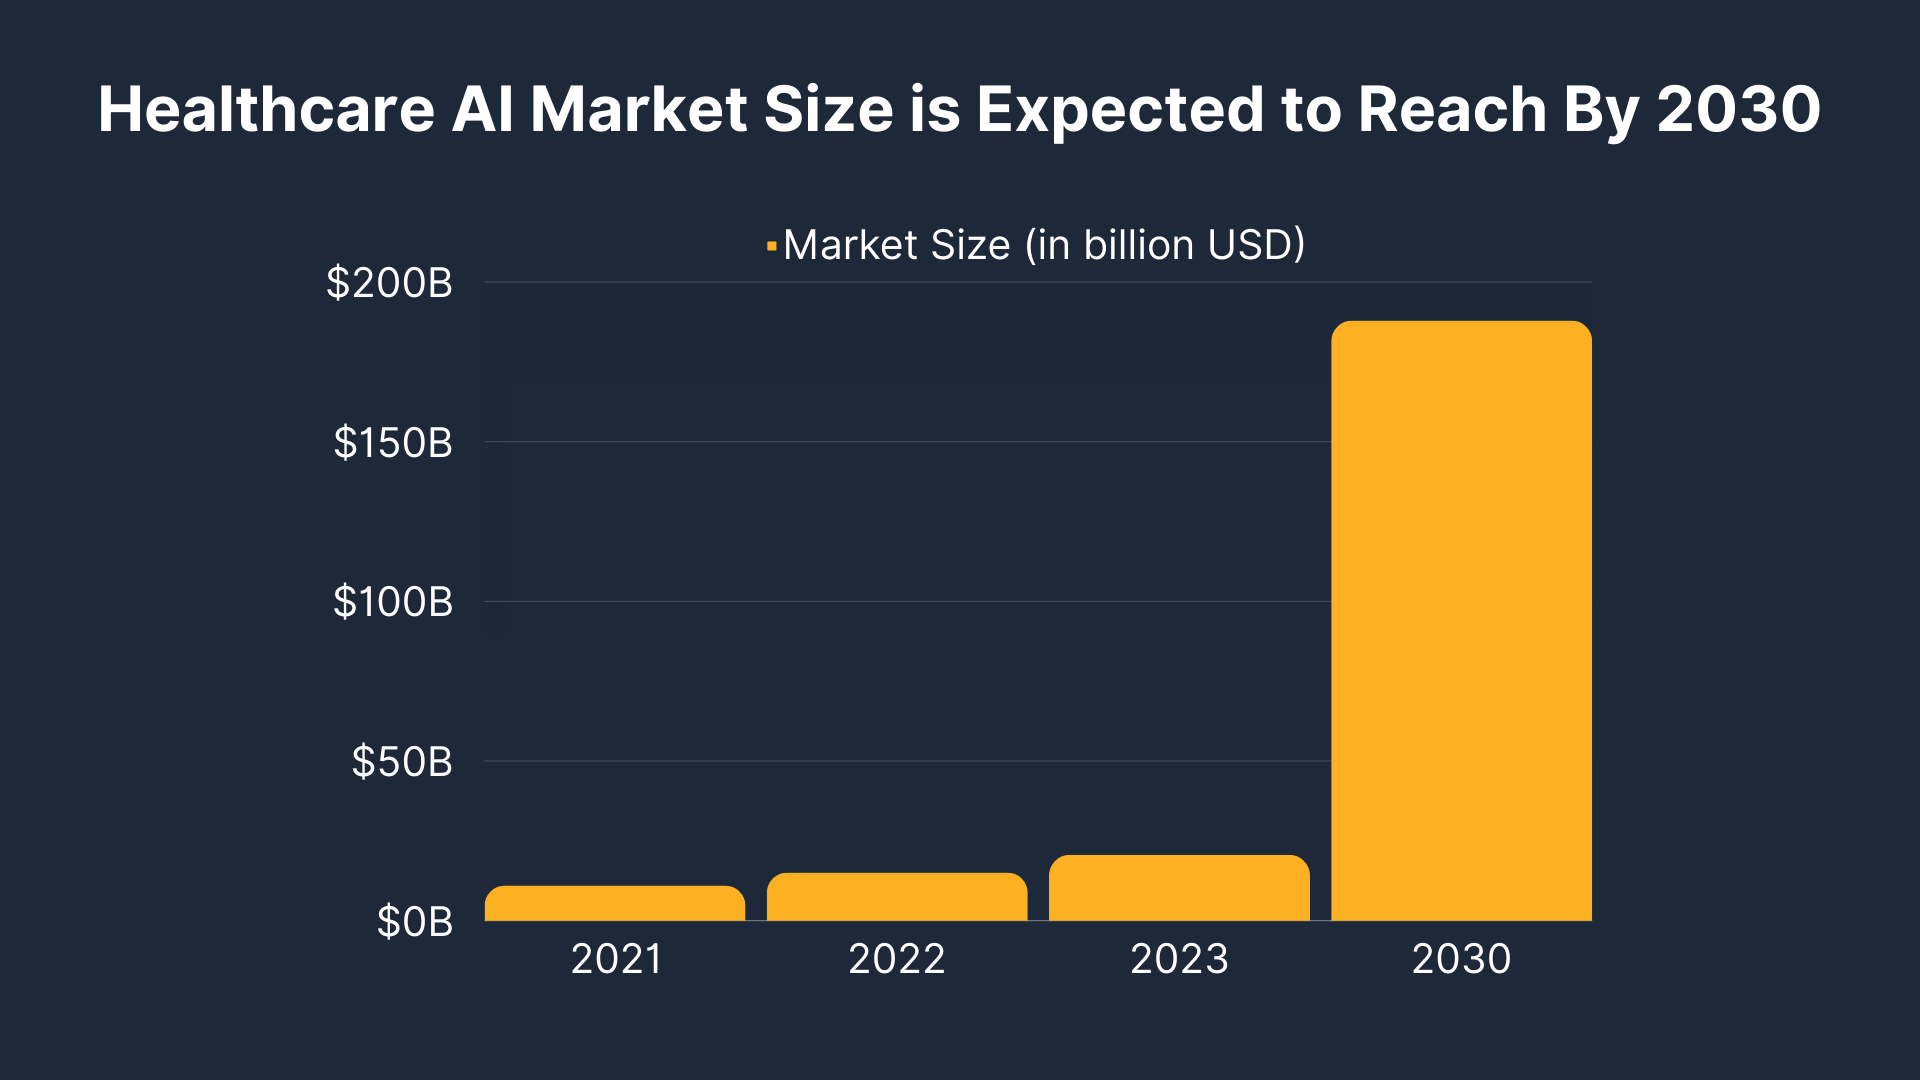 Healthcare AI Market Size is Expected to Reach By 2030